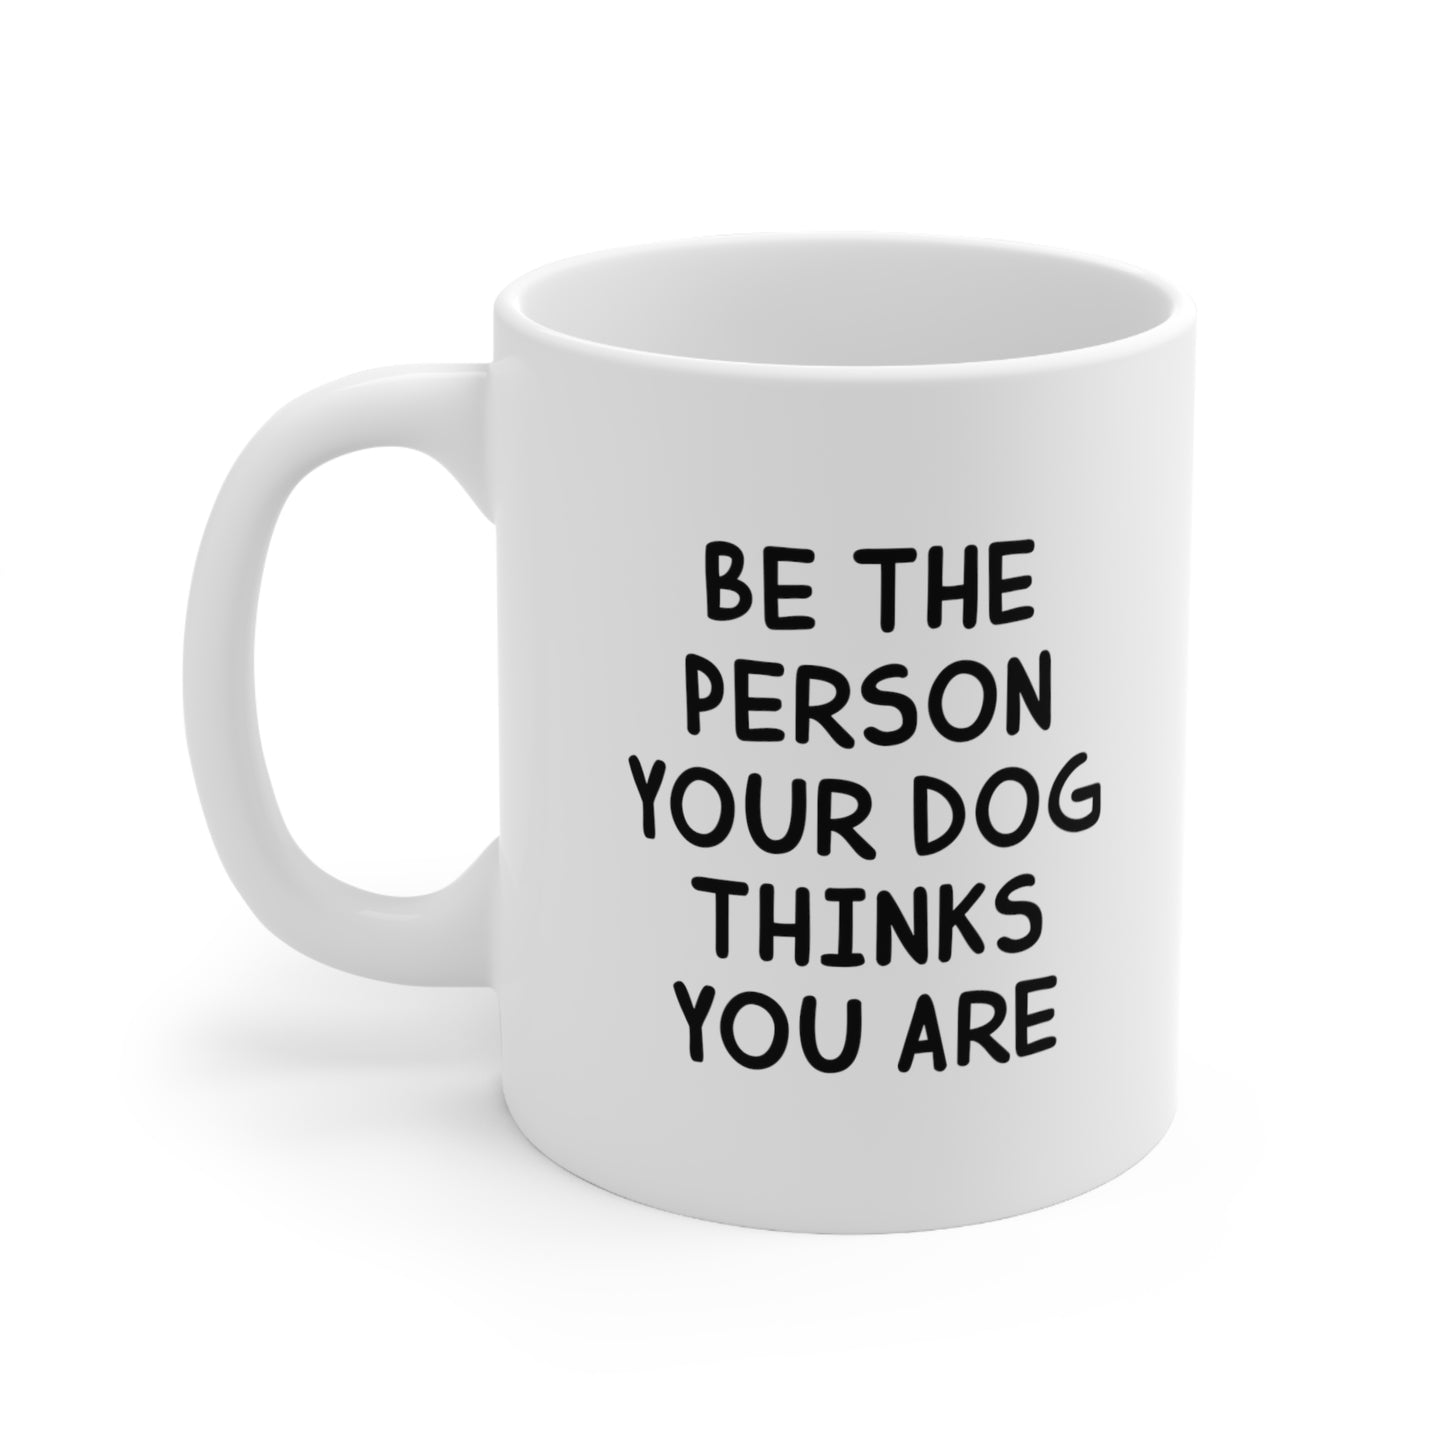 Be the person your dog thinks you are Coffee Mug 